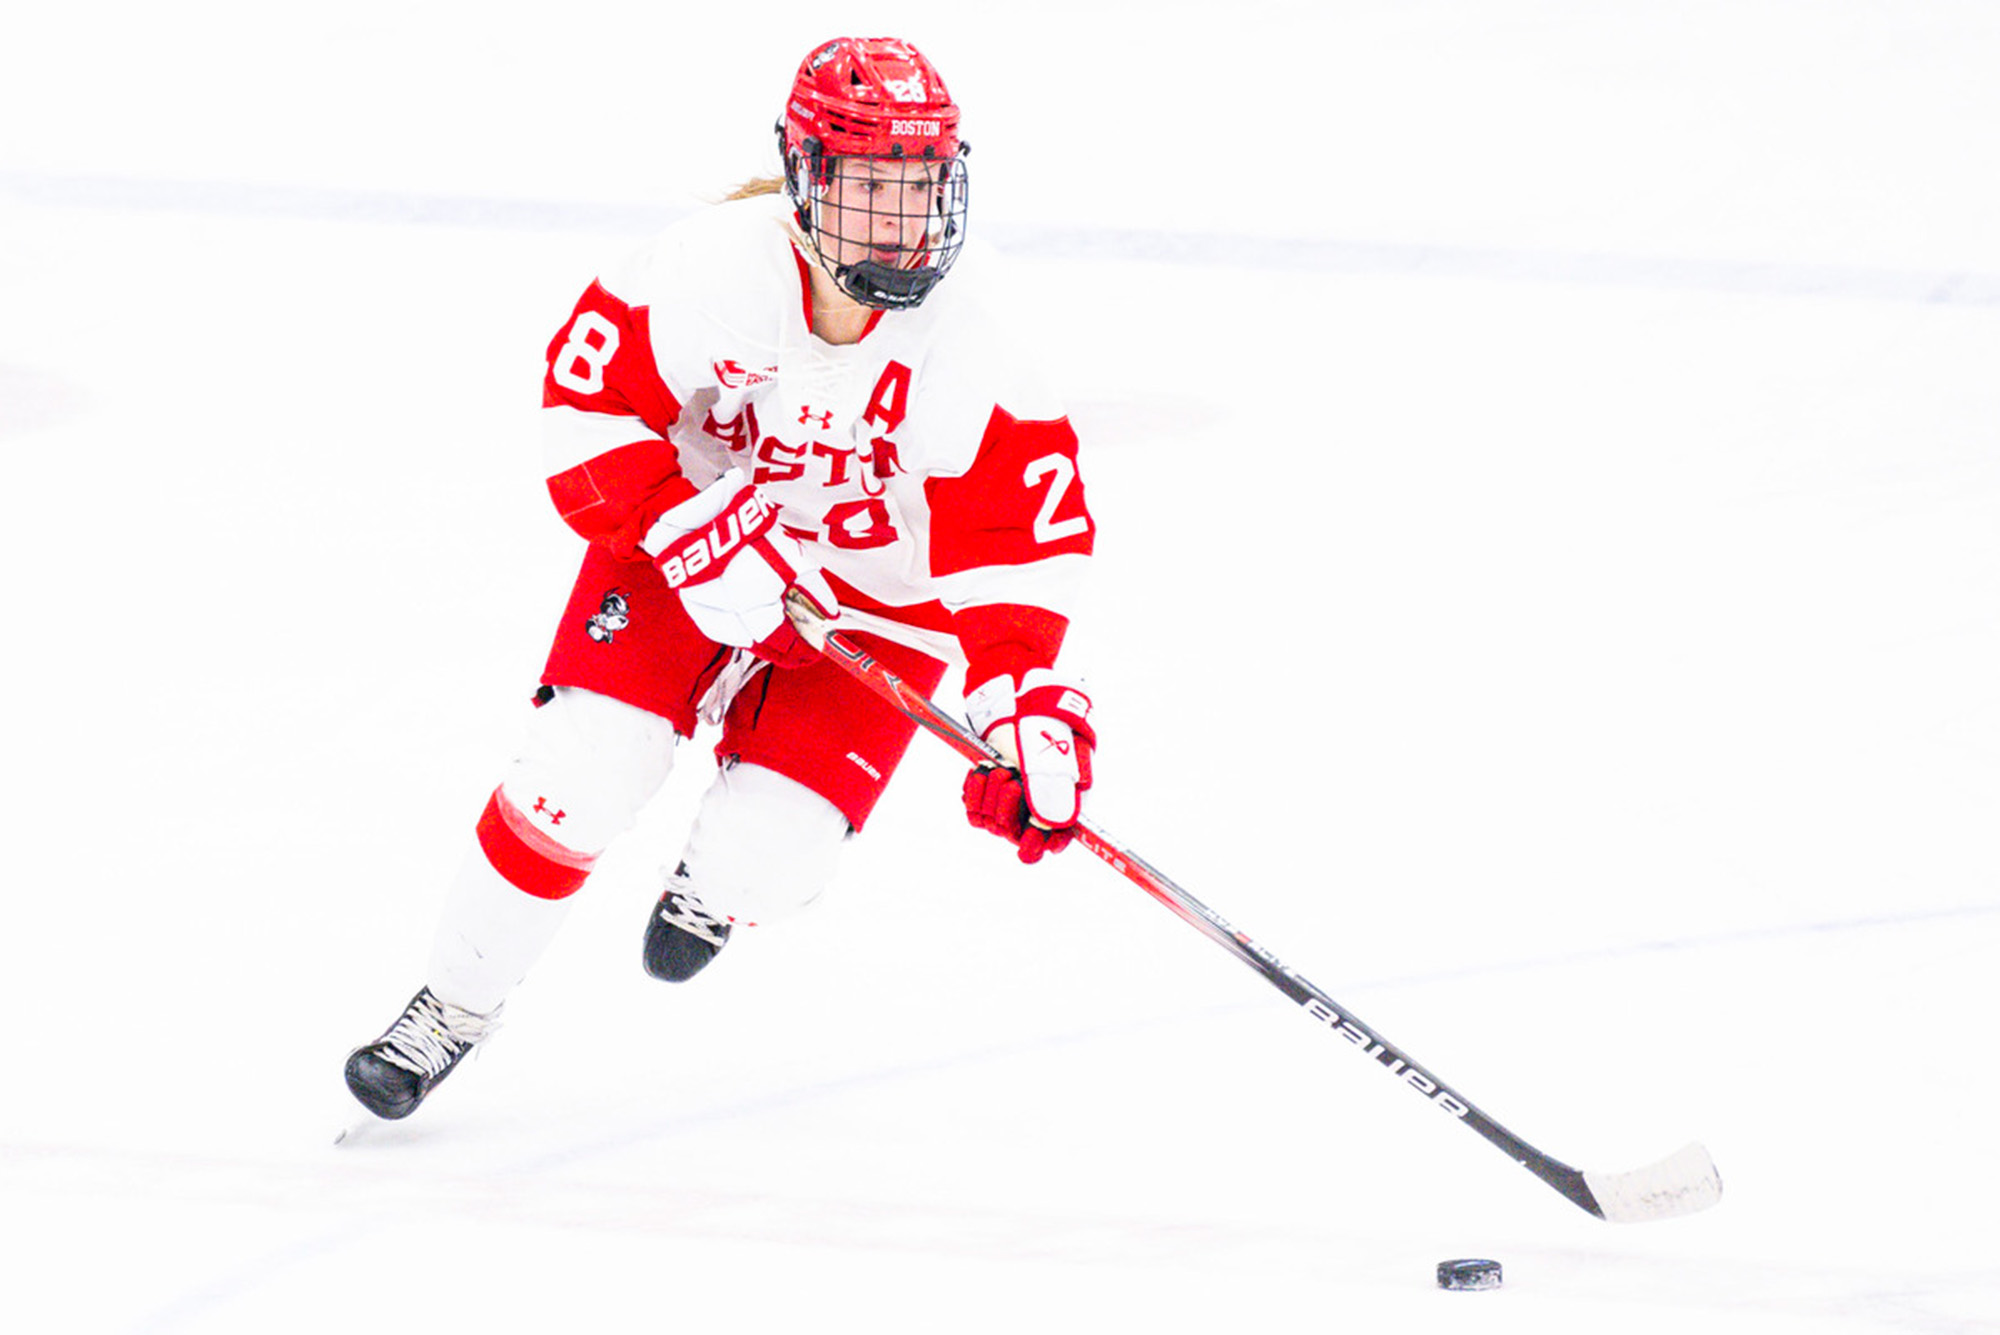 Photo: A BU women's hockey player in red and white uniform carries a puck down the ice during a recent game